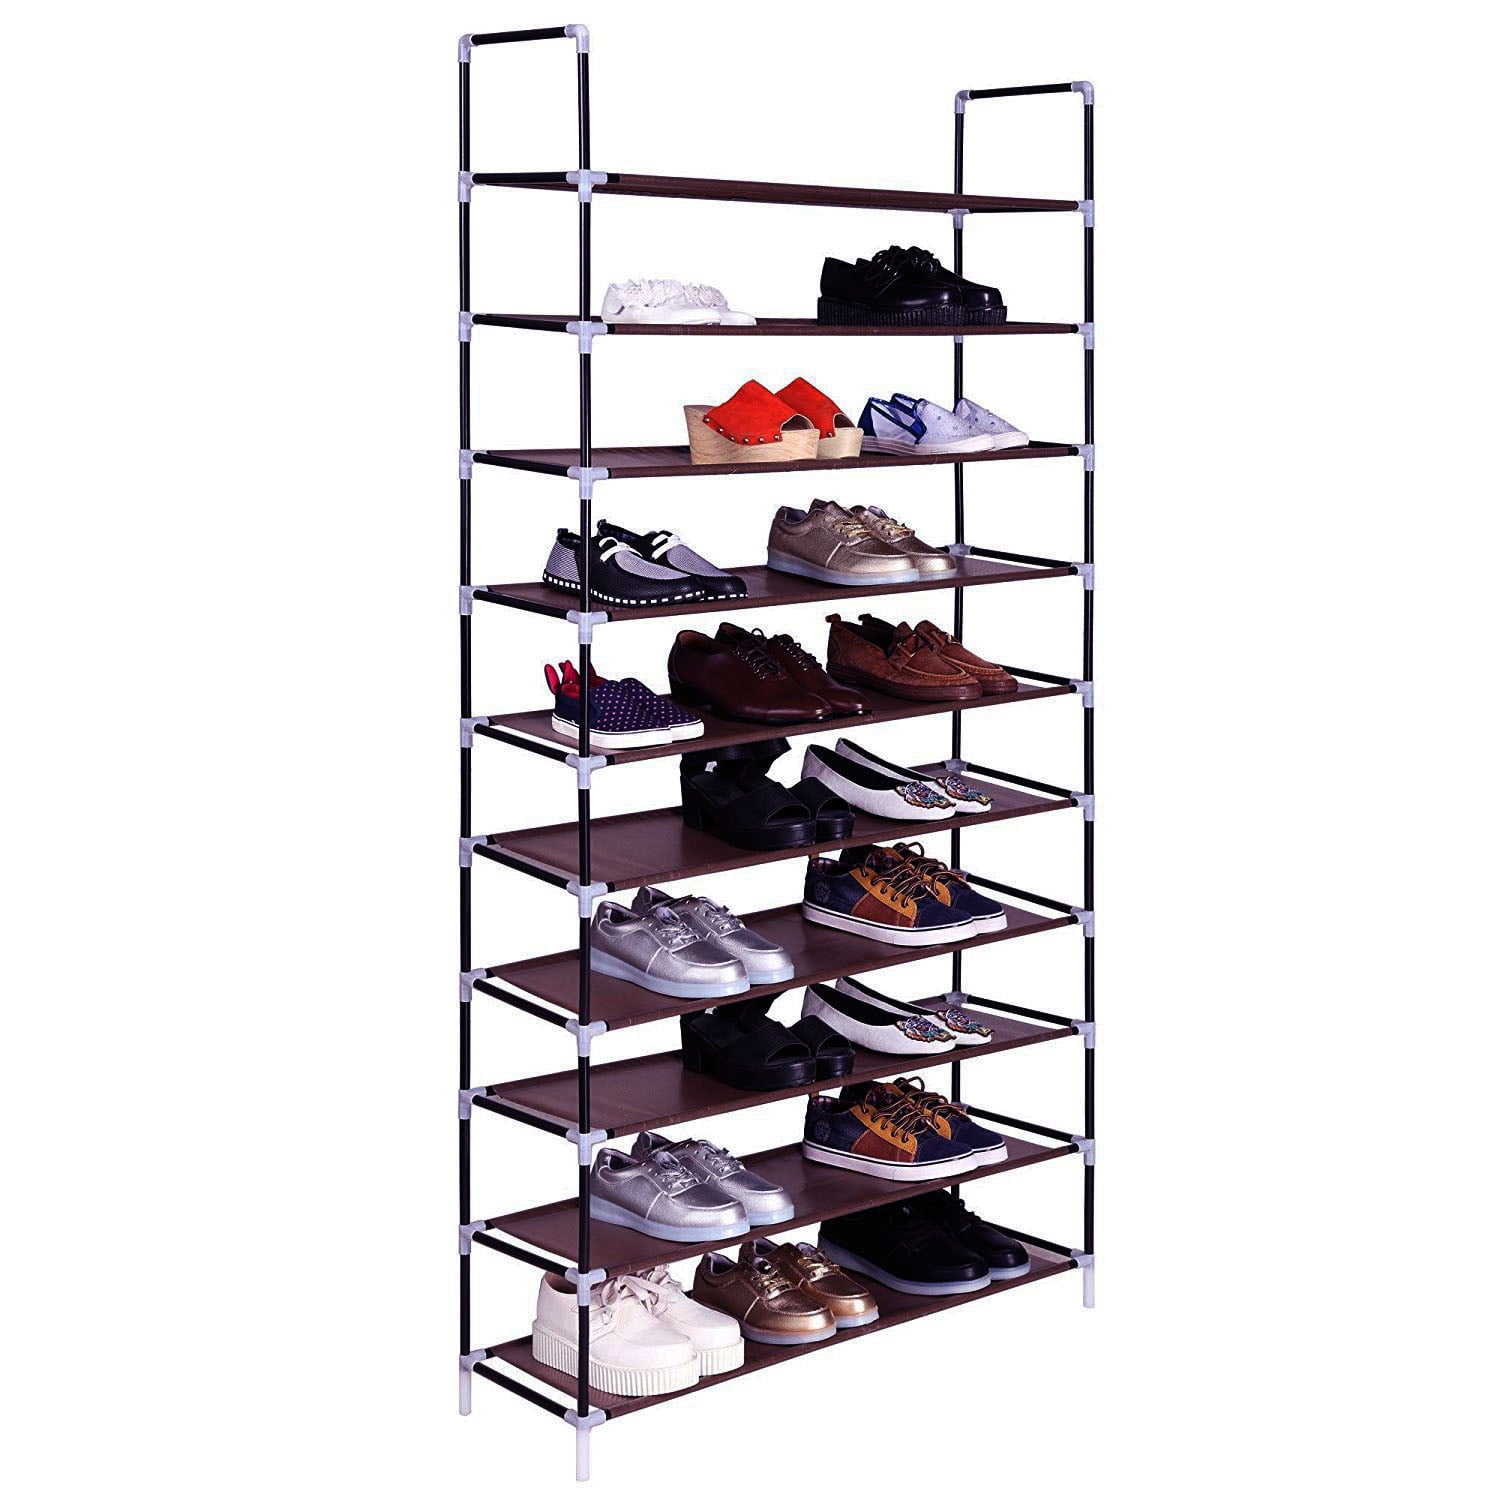 Details about   Multi-layer Shoe Rack Storage Shelves Home Furniture Organizer With Metal Tube 